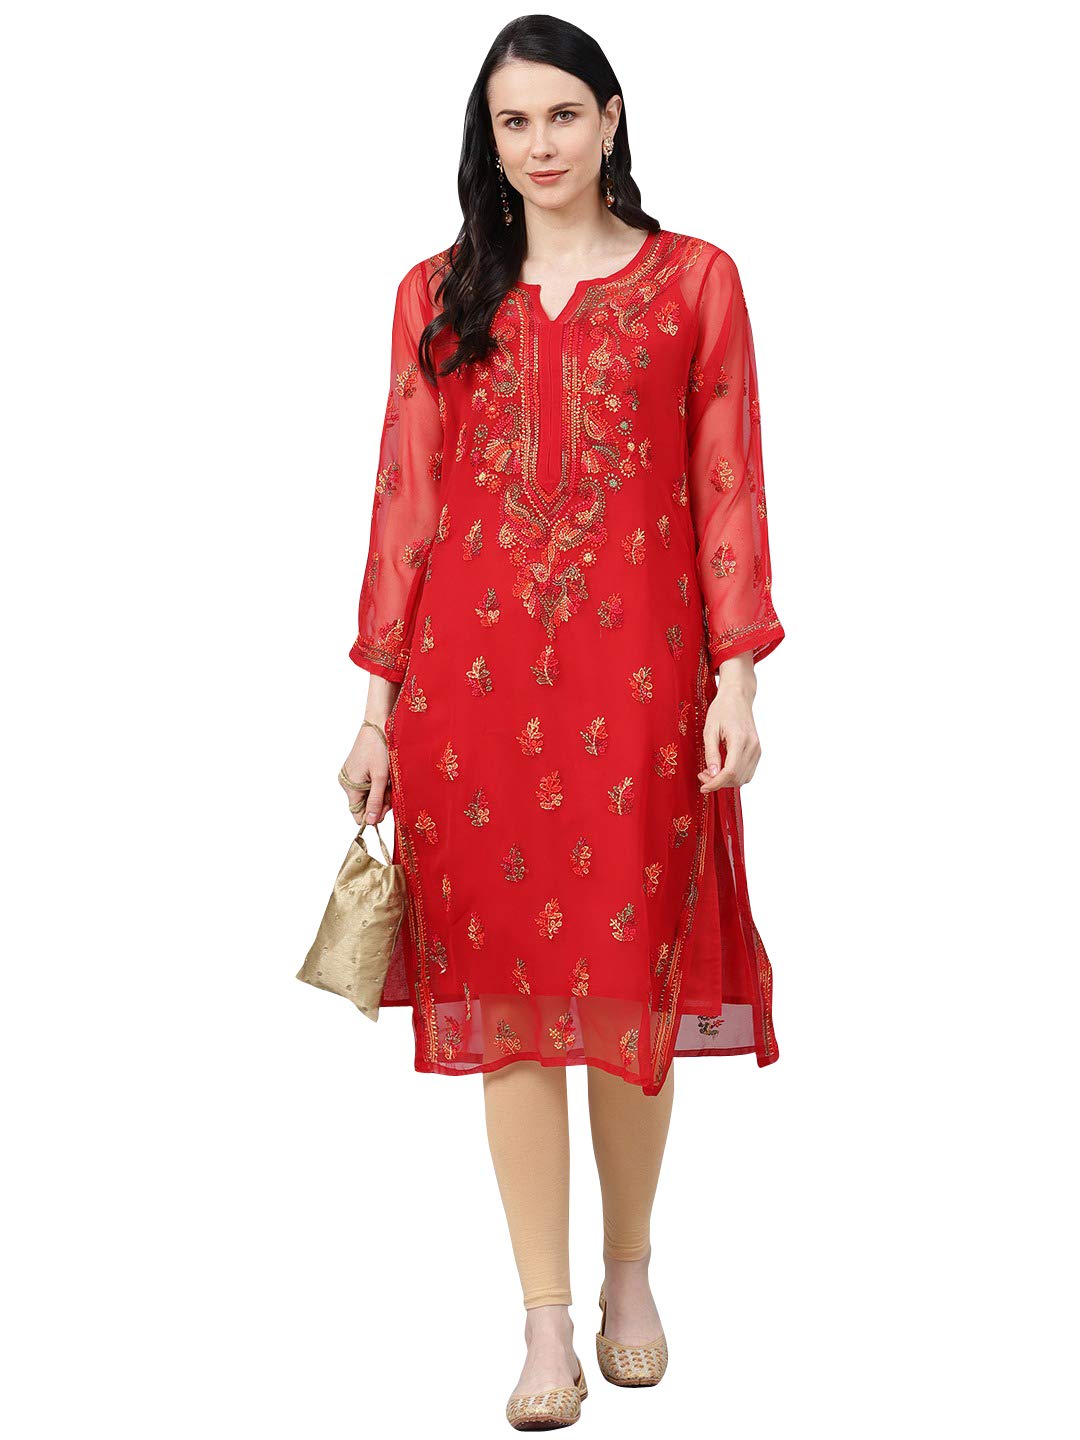 Ada Lucknowi Chikankari Faux Georgette Hand Embroidery Kurta with Slip for Women 5XL411155 Red